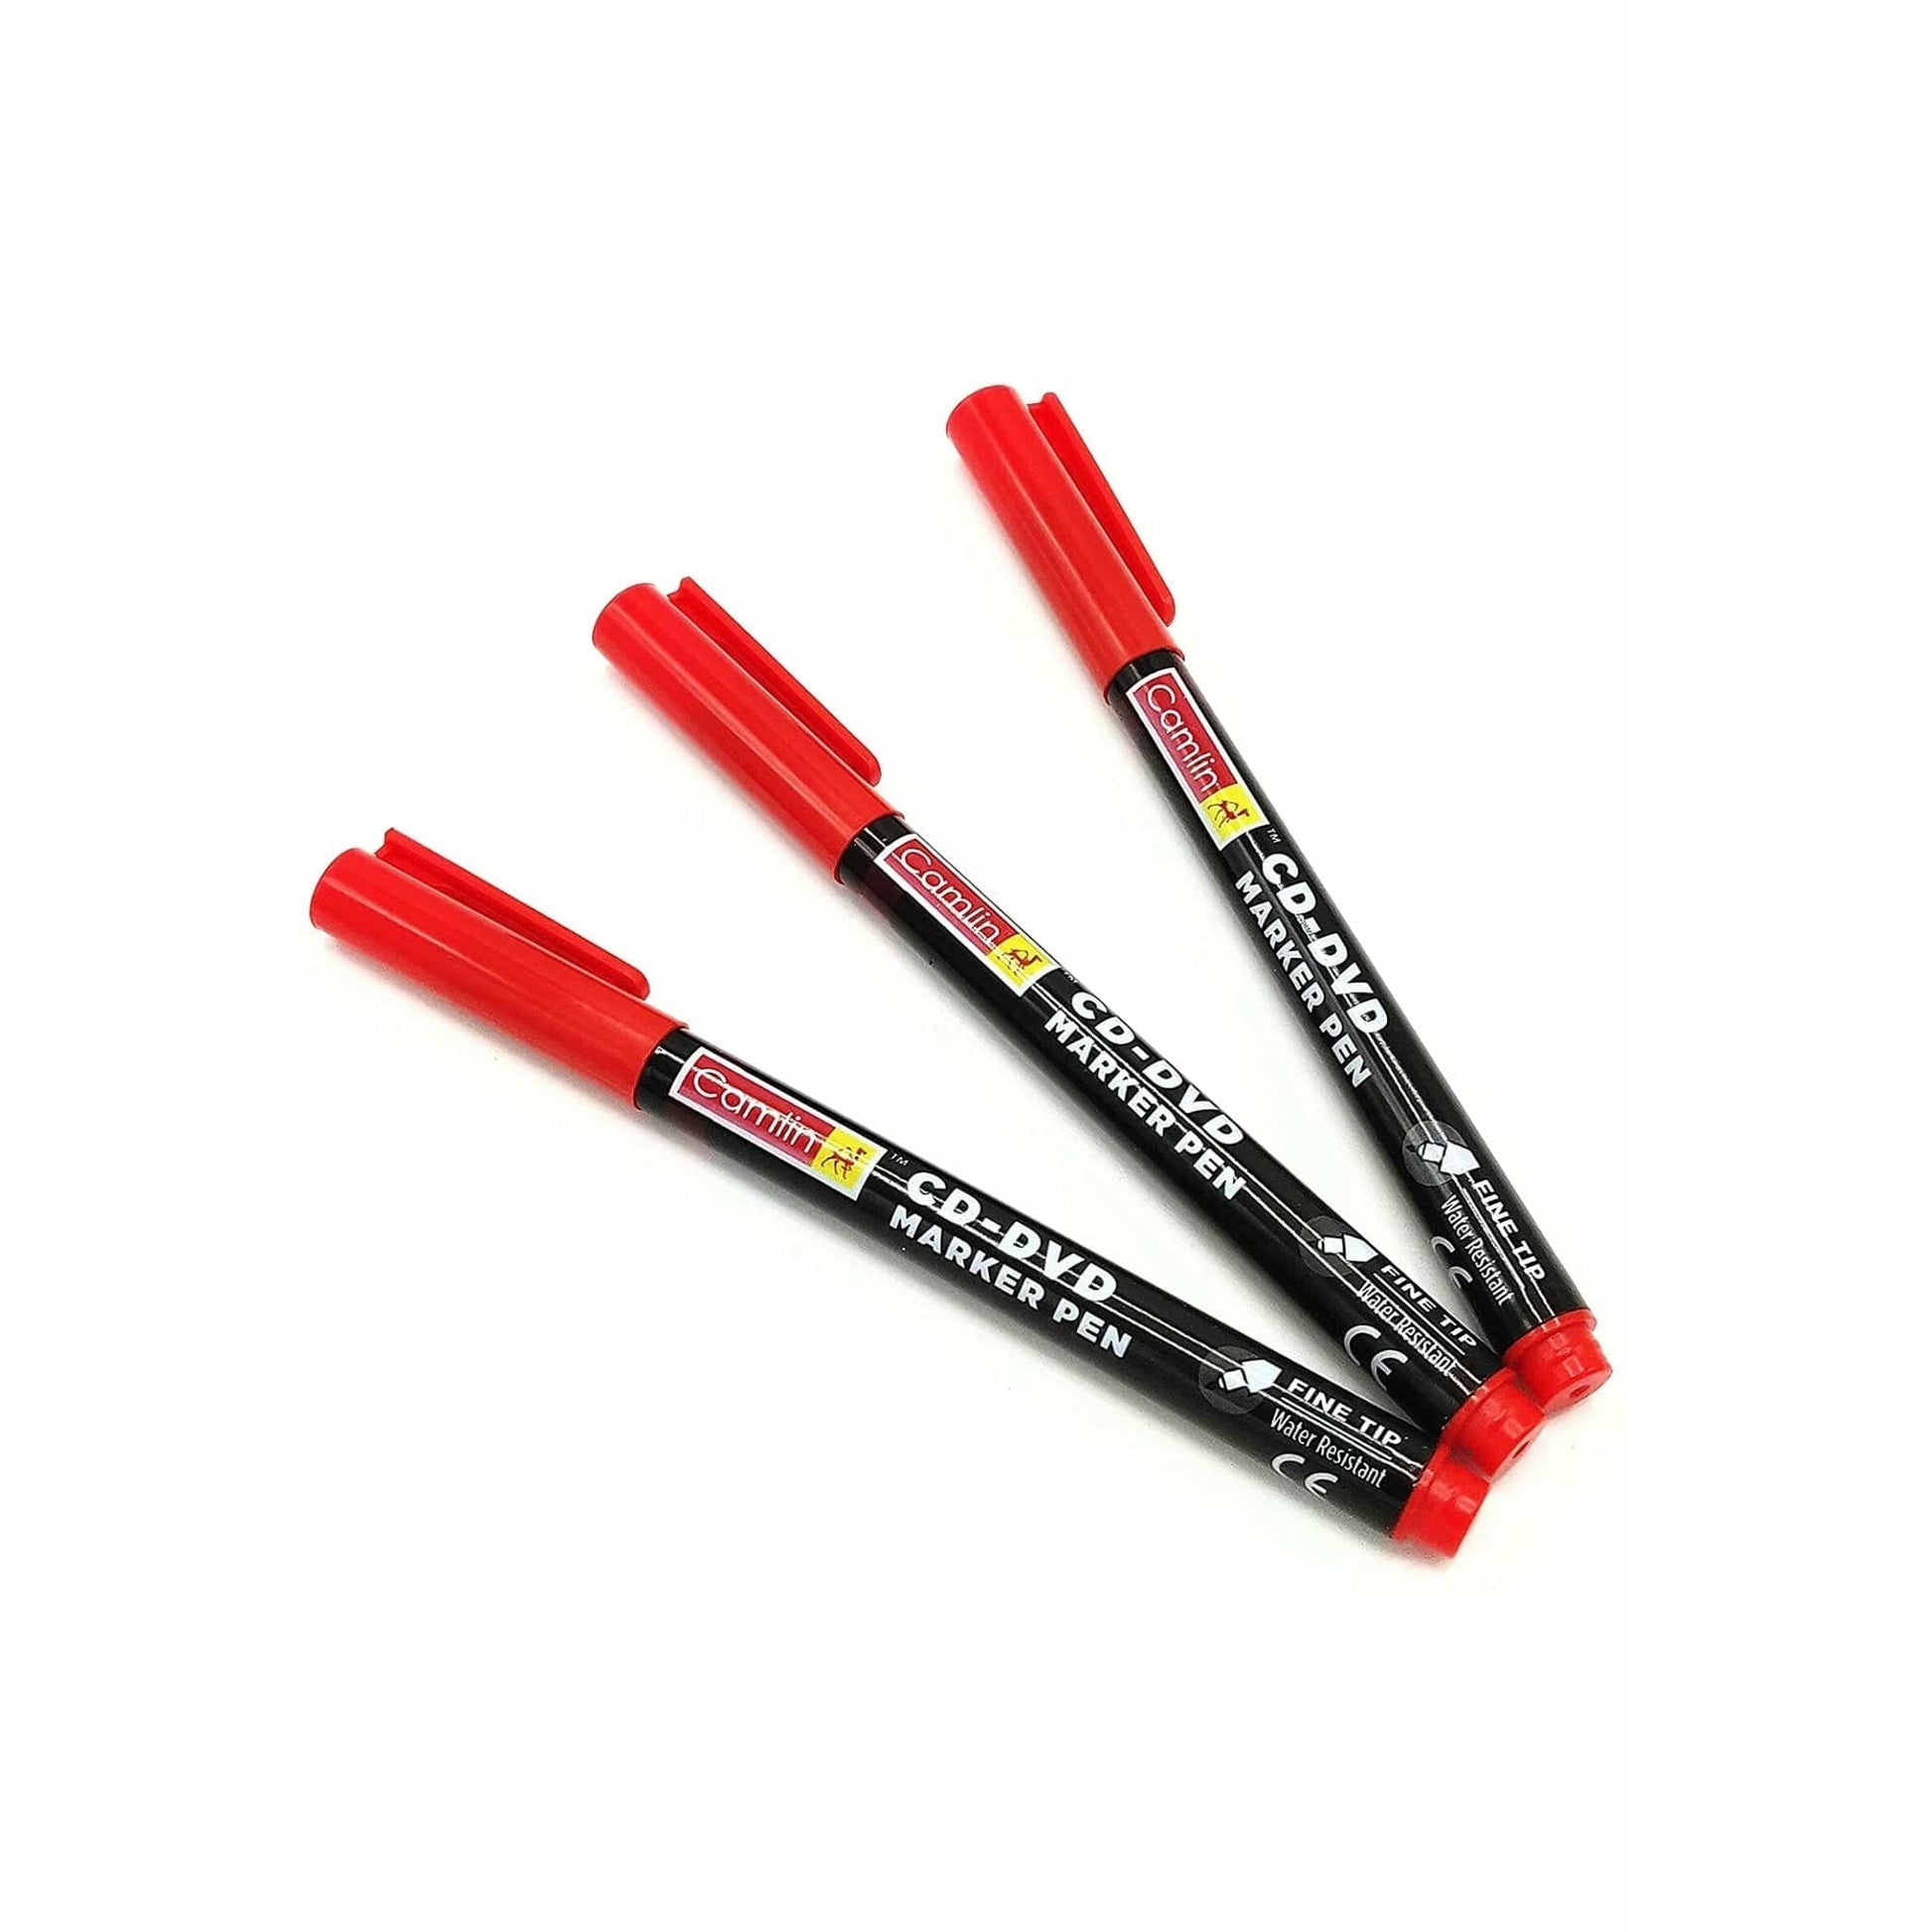 parshwa traders Camlin CD-DVD marker pen - red (Thin Point)